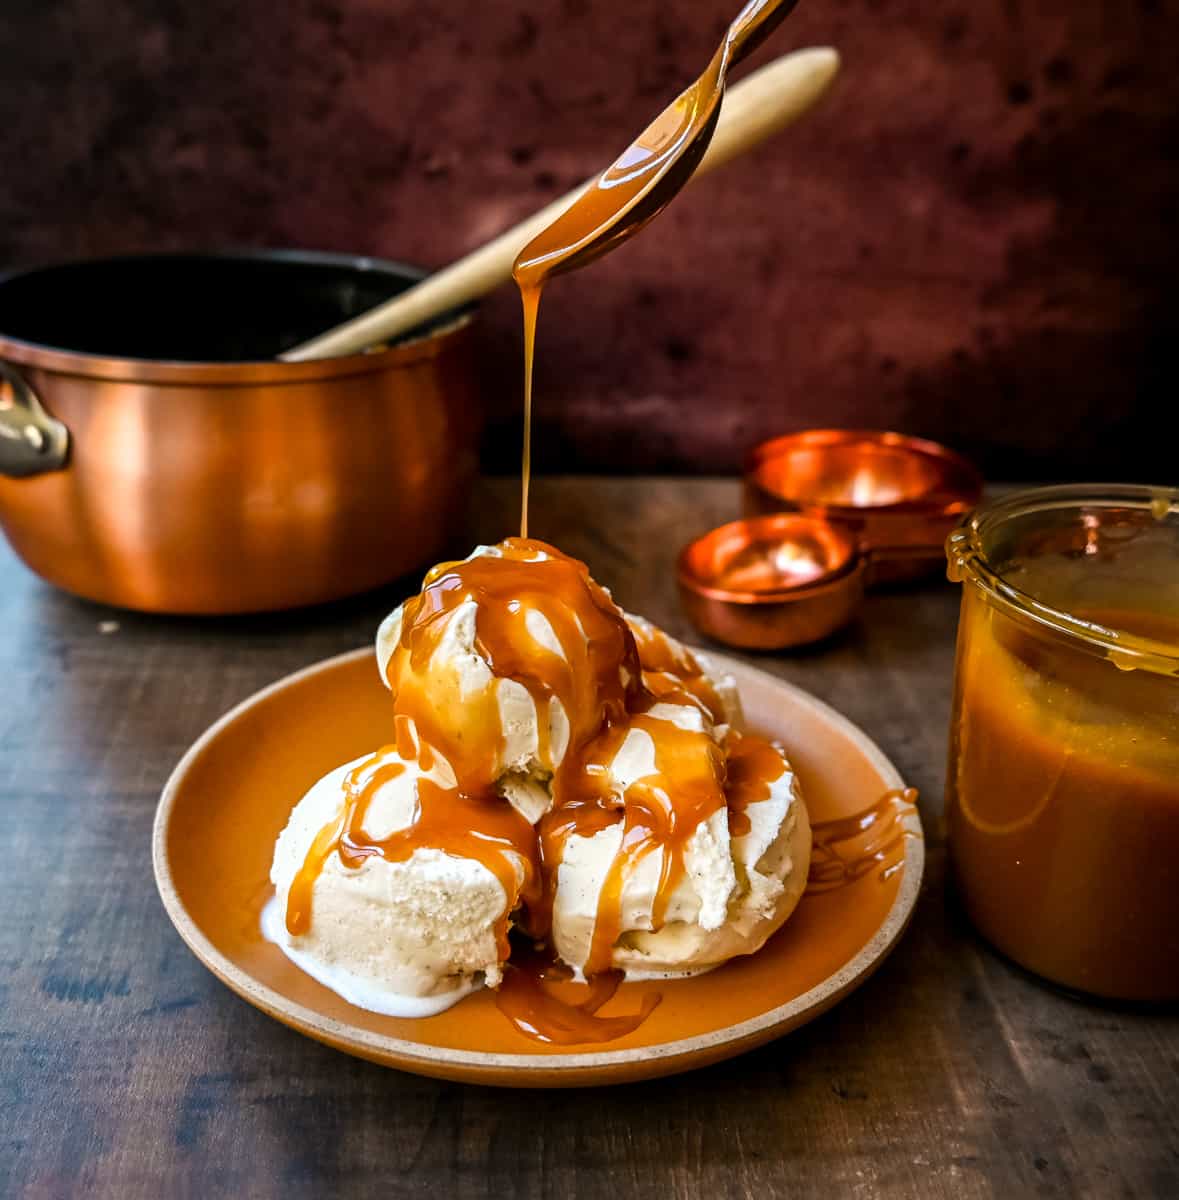 Easy Homemade Caramel Sauce on ice cream. How to make rich, creamy homemade caramel sauce with only four ingredients and a foolproof method. This is the easiest, most delicious caramel sauce recipe!